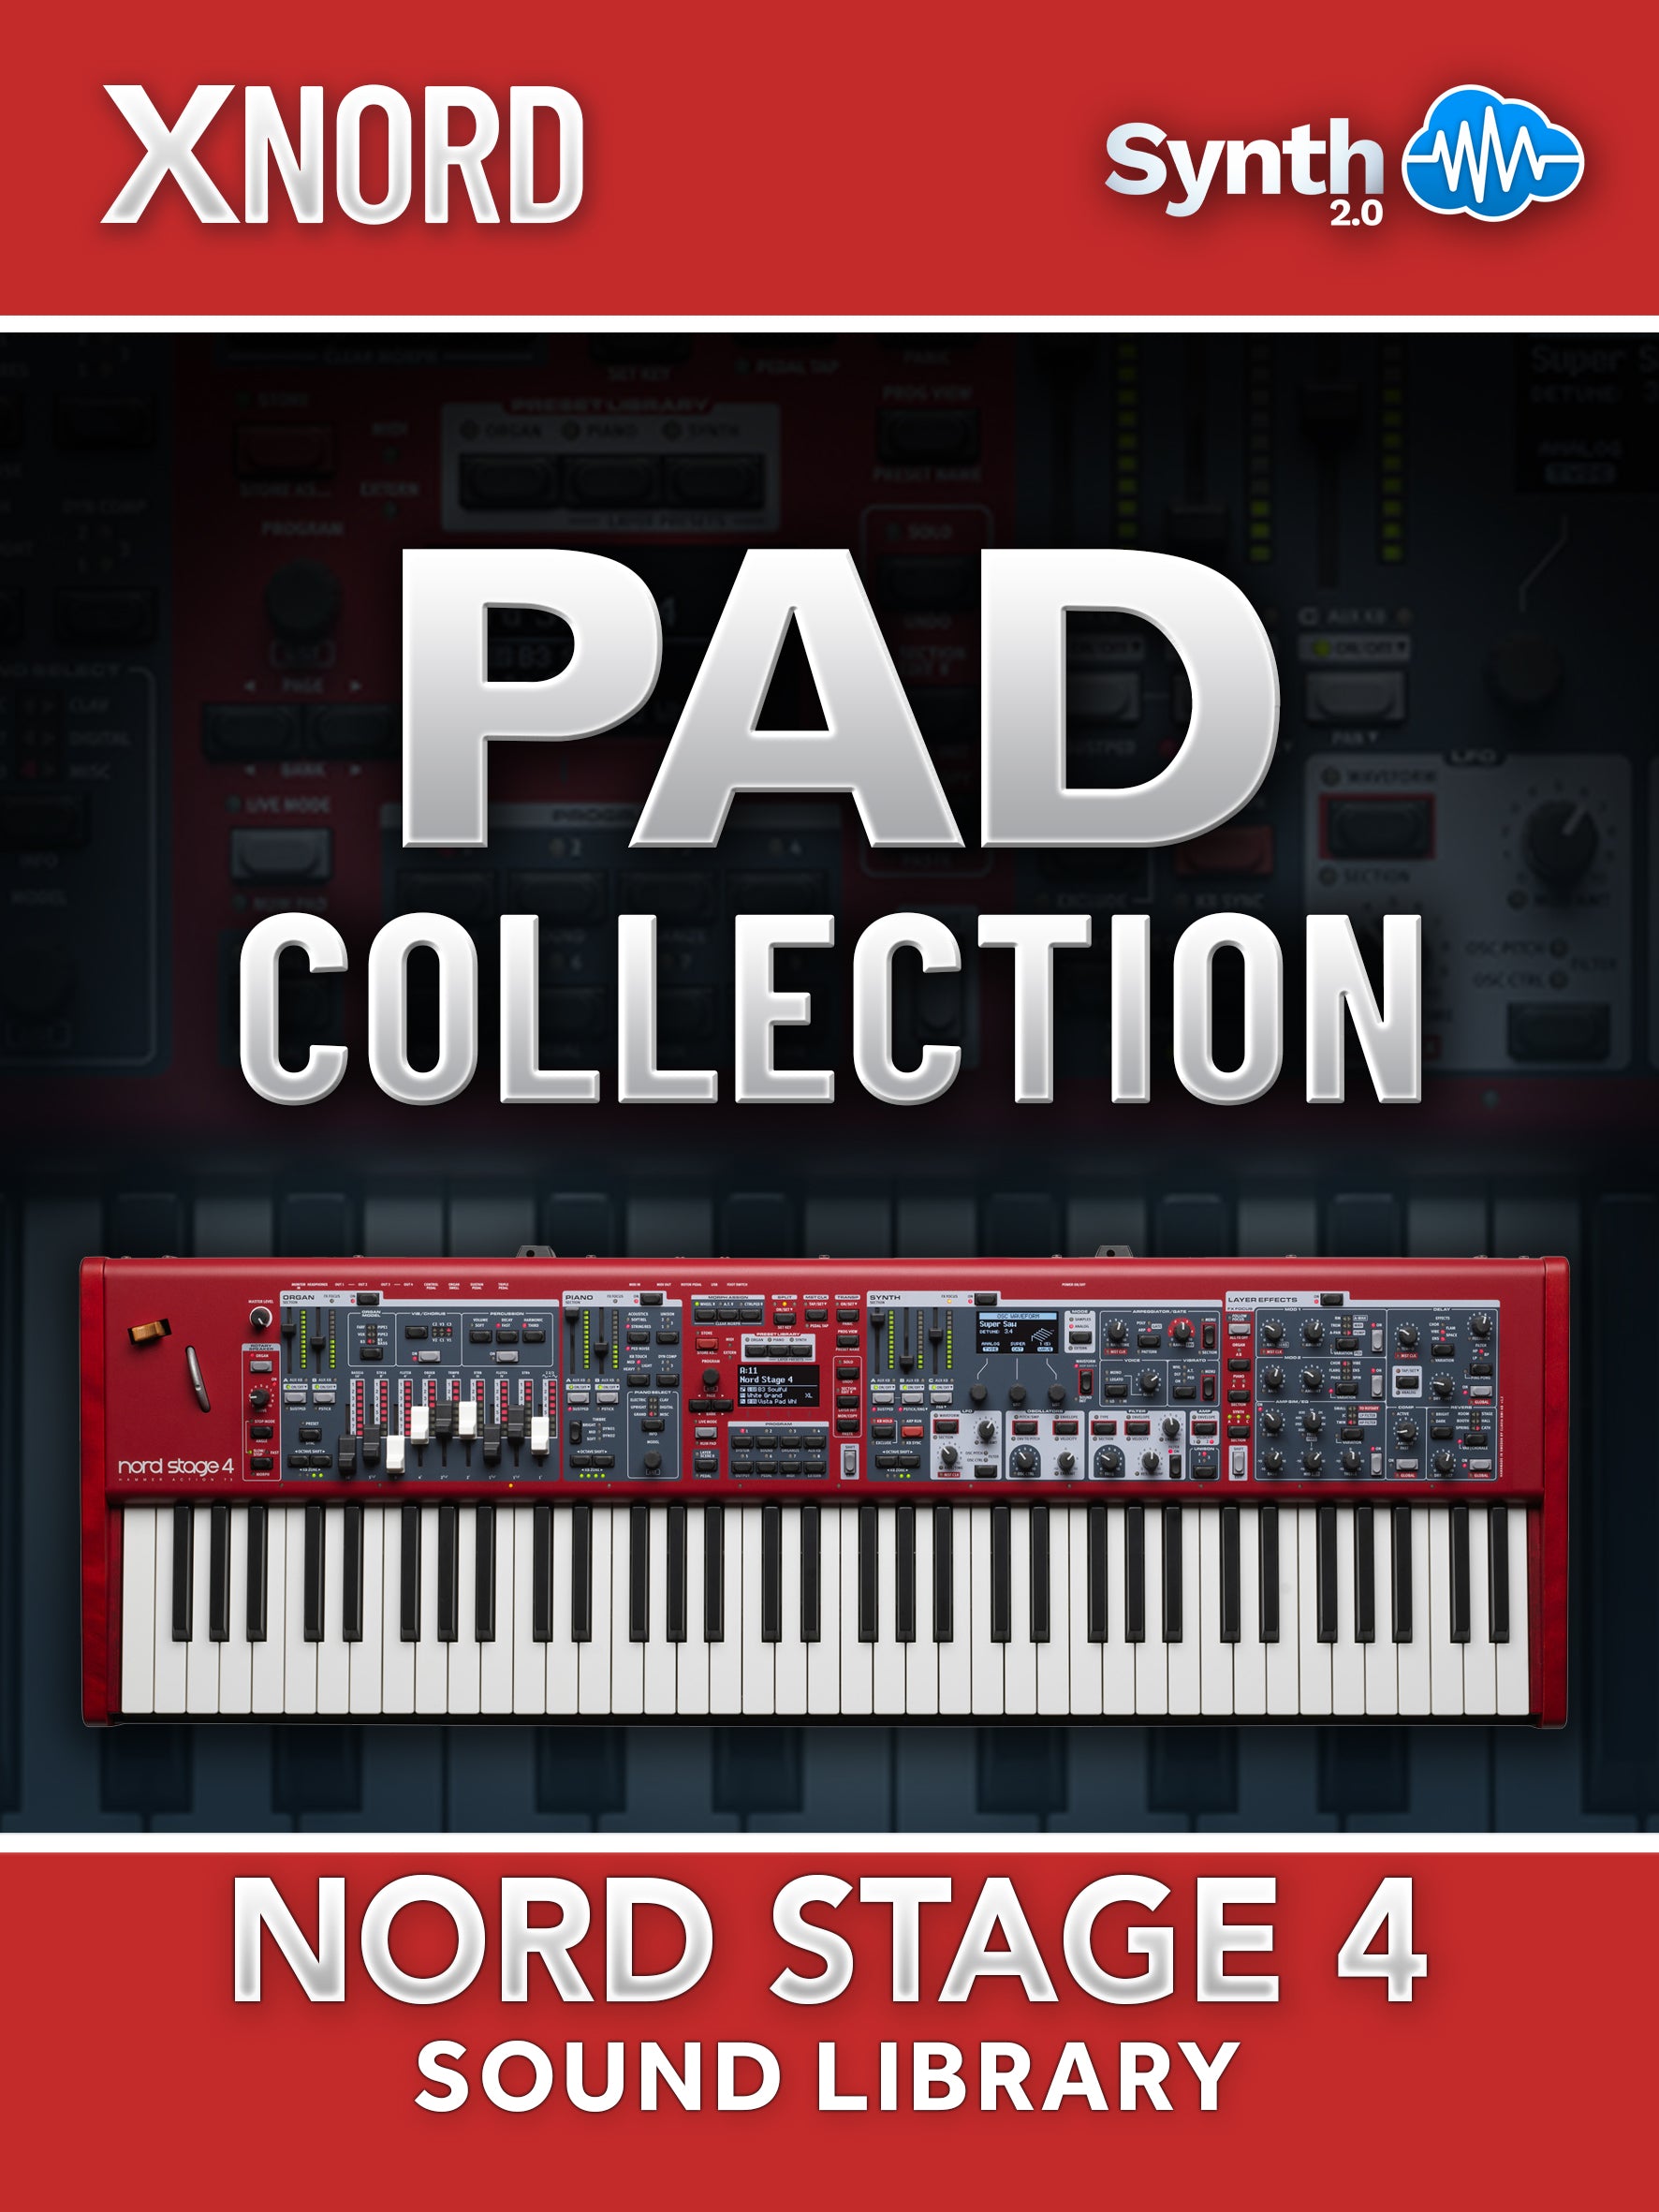 ASL010 - Pad Collection V1 - Nord Stage 4 ( 23 presets )